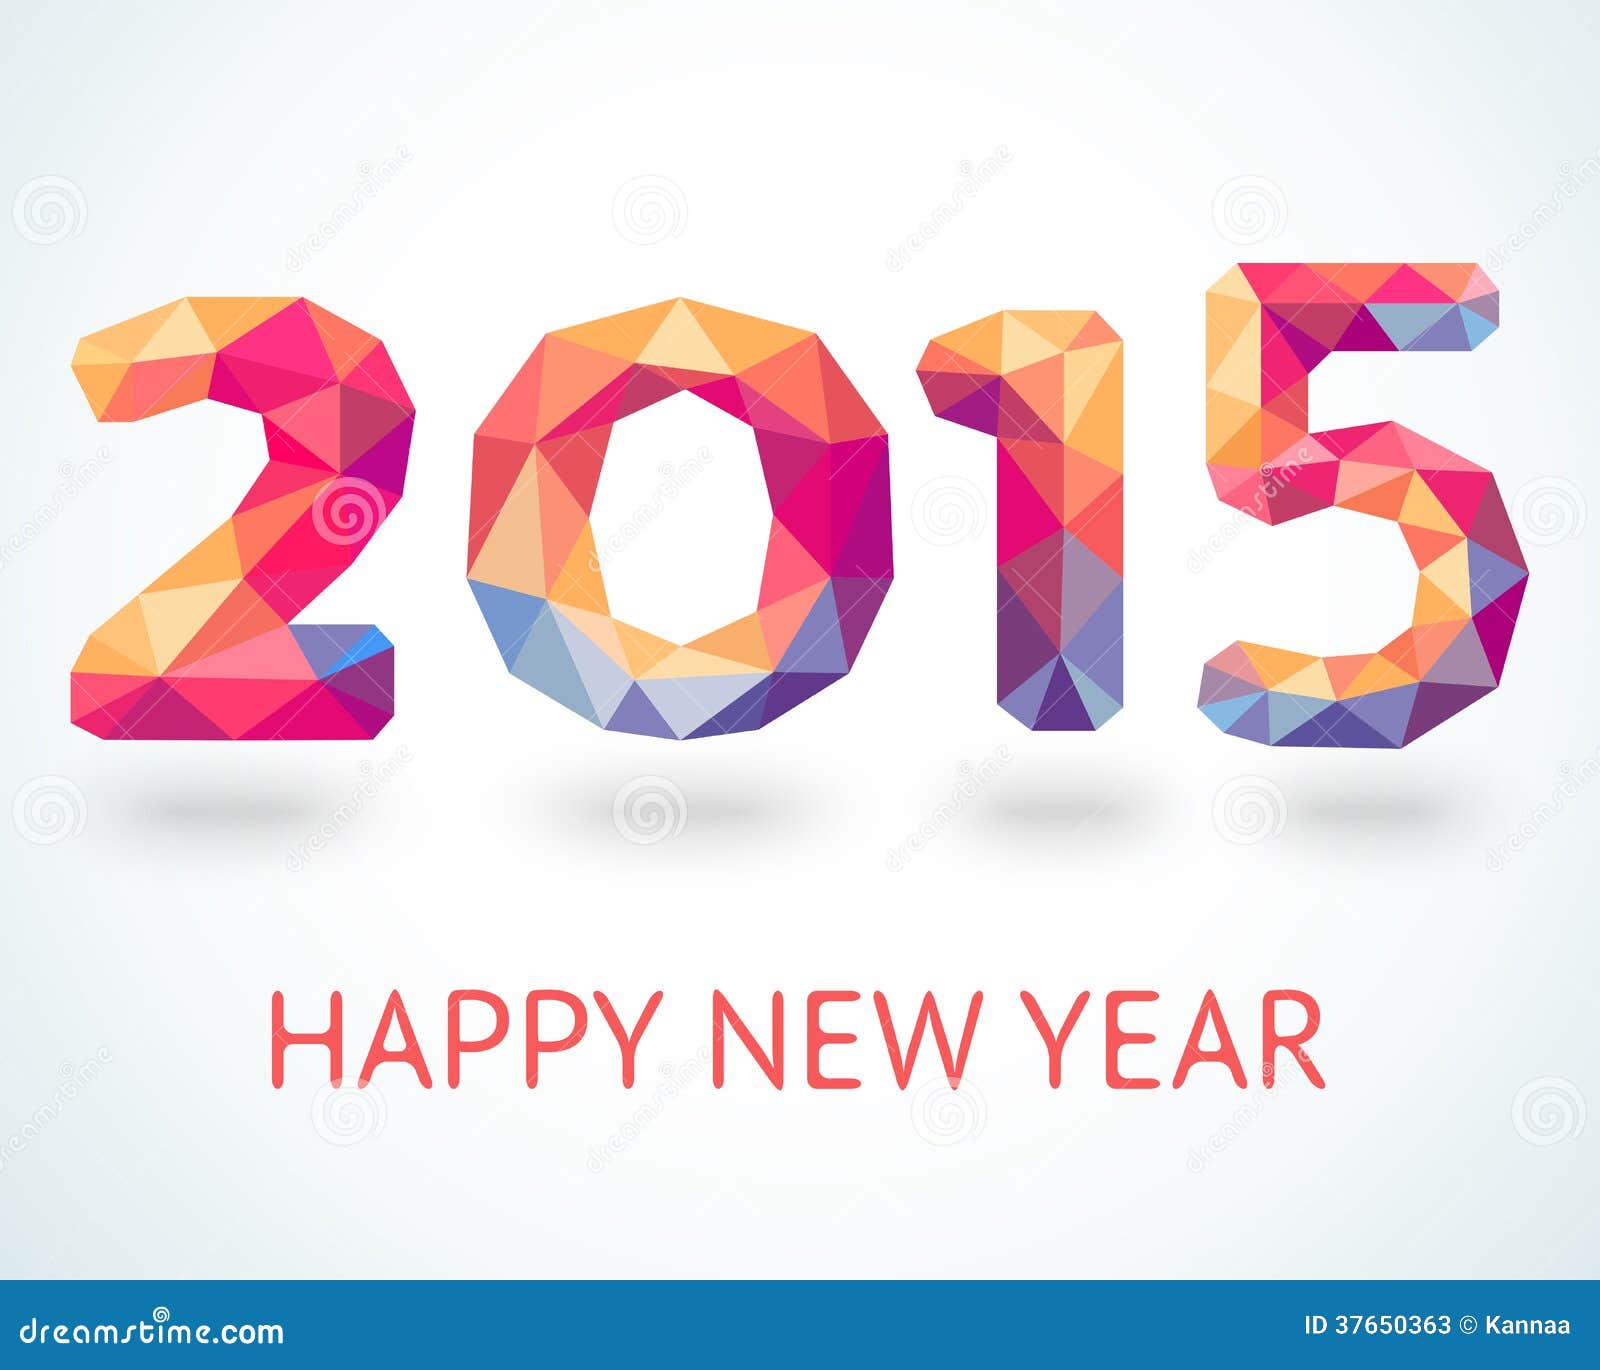 happy new year greeting clipart - photo #12